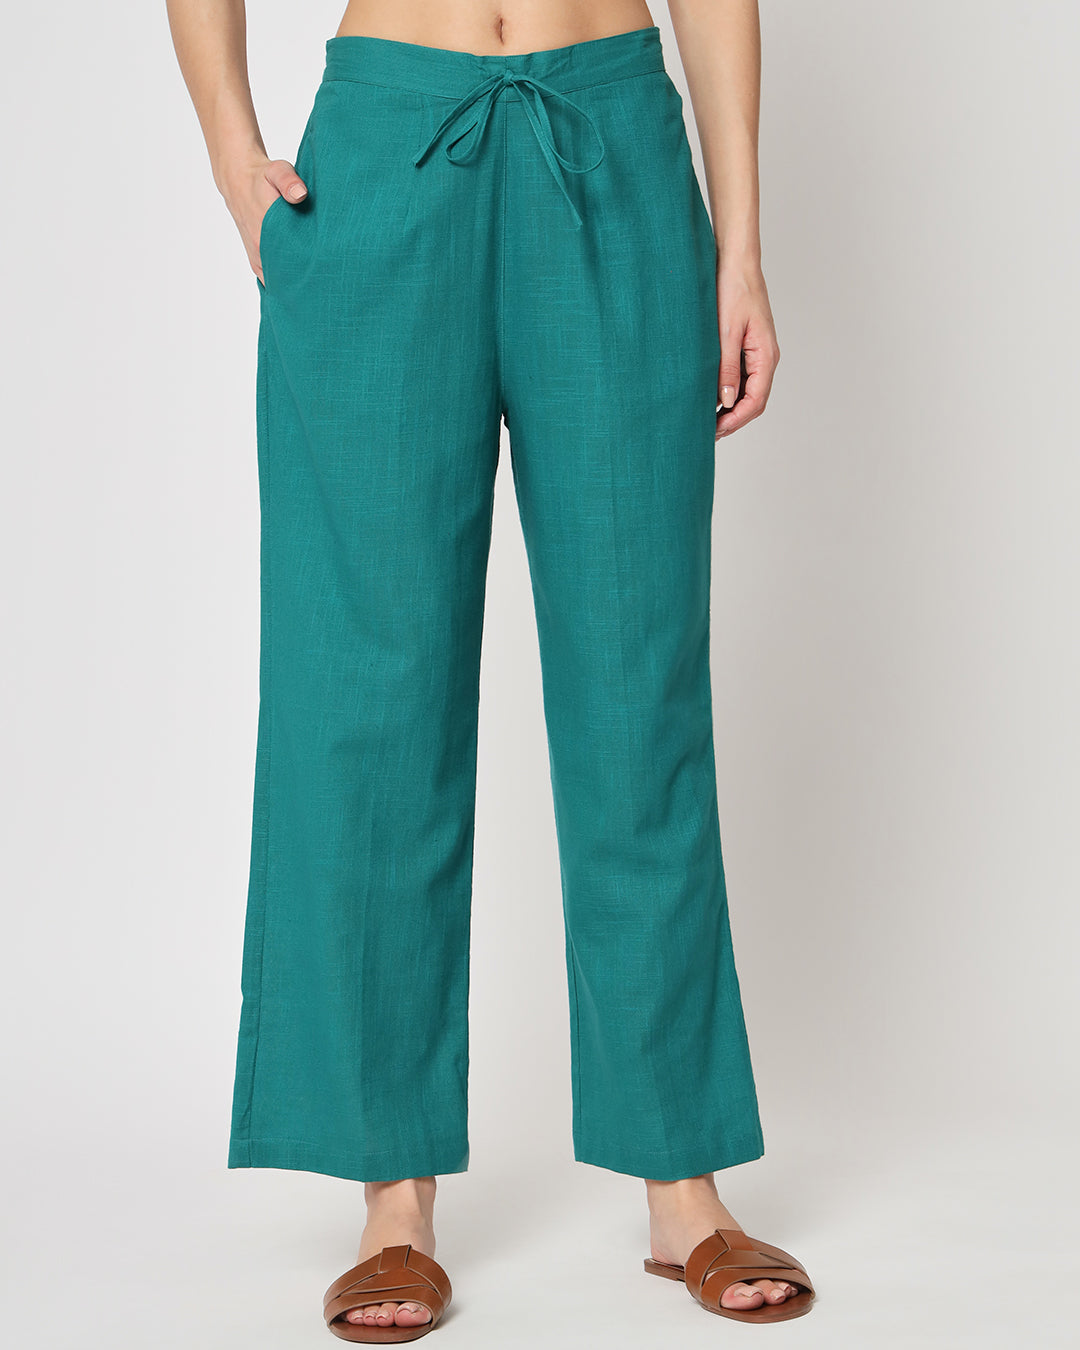 Combo: Wings of Love & Forest Green Straight Pants- Set of 2